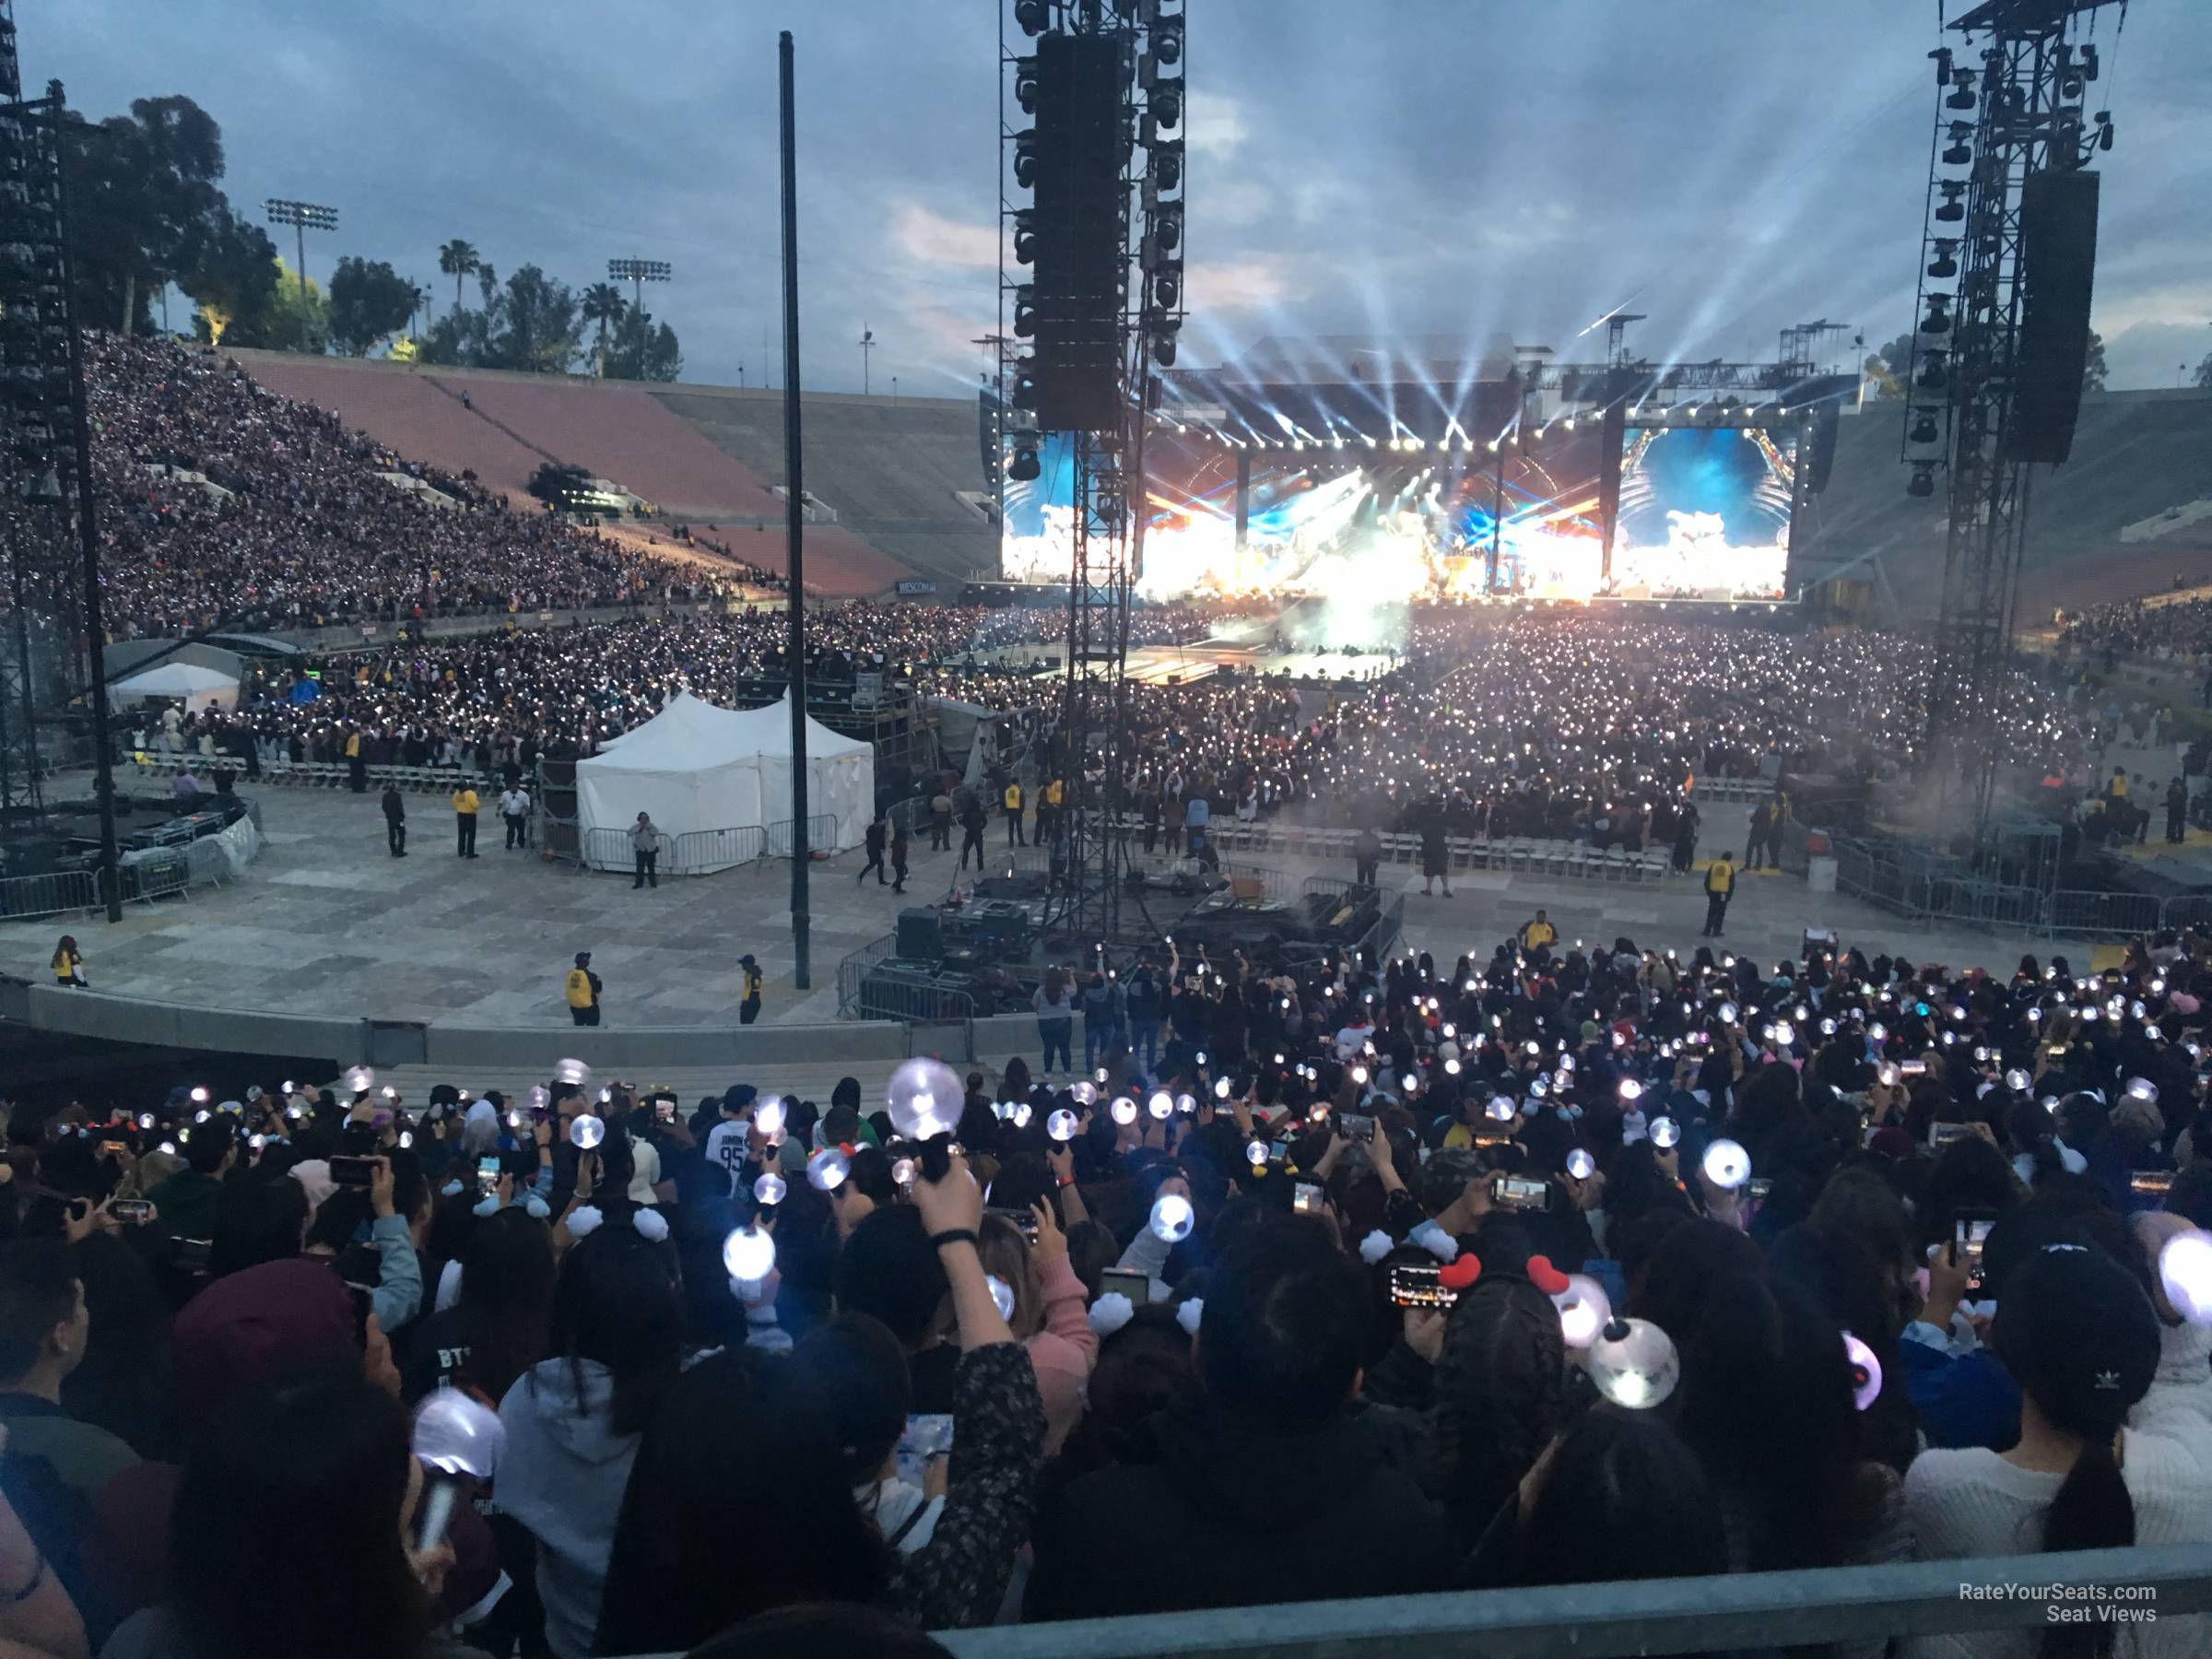 section 13, row 30 seat view  for concert - rose bowl stadium